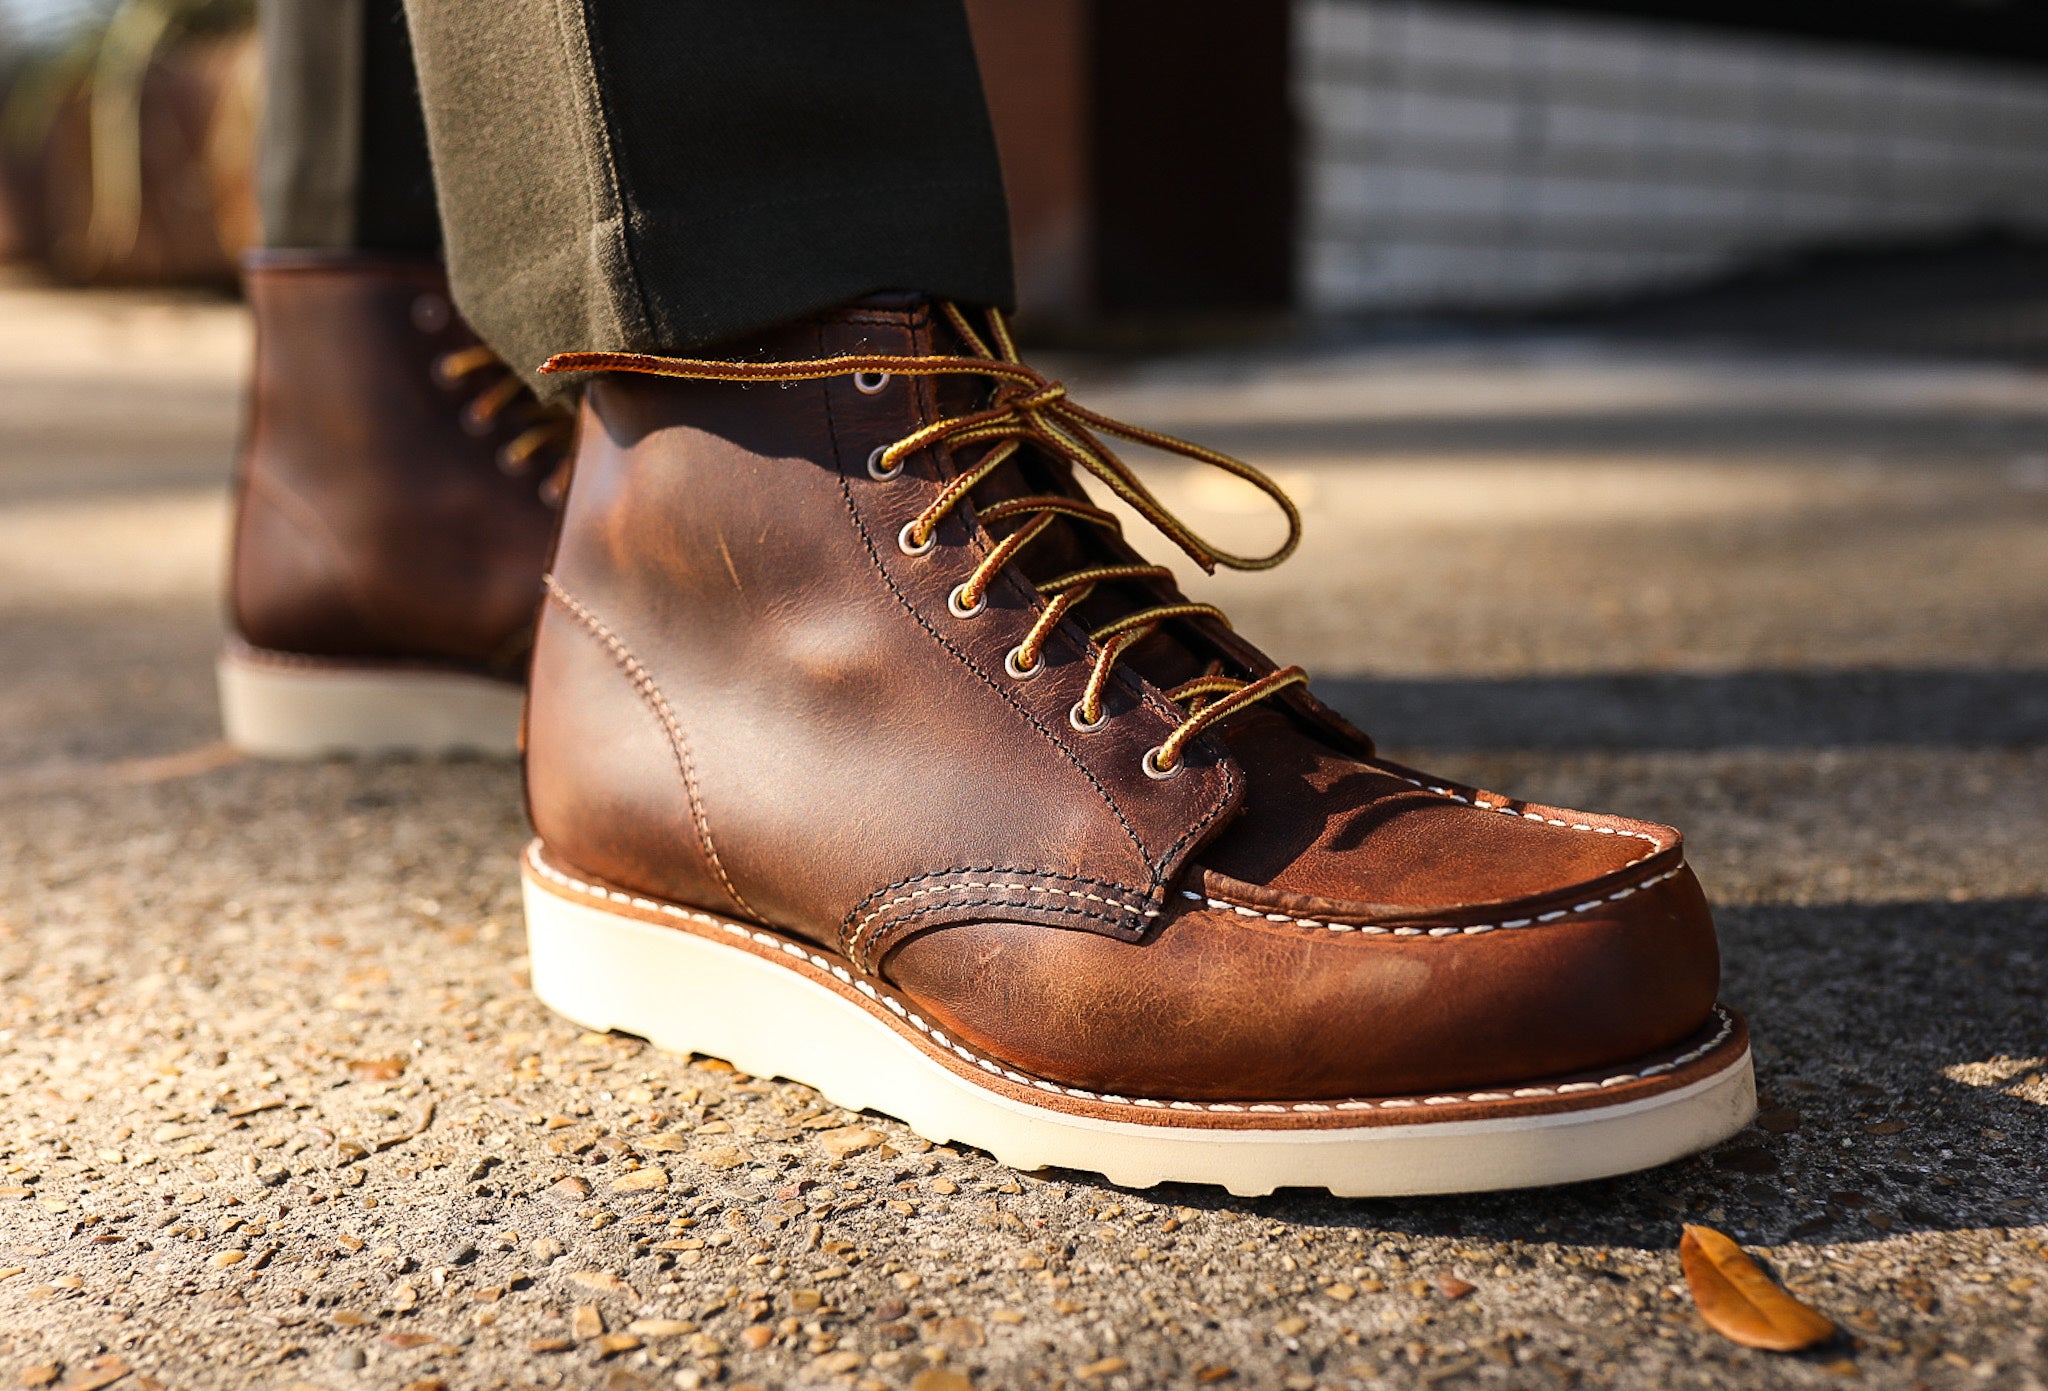 Red Wing's Women Moc Toe Boot Review